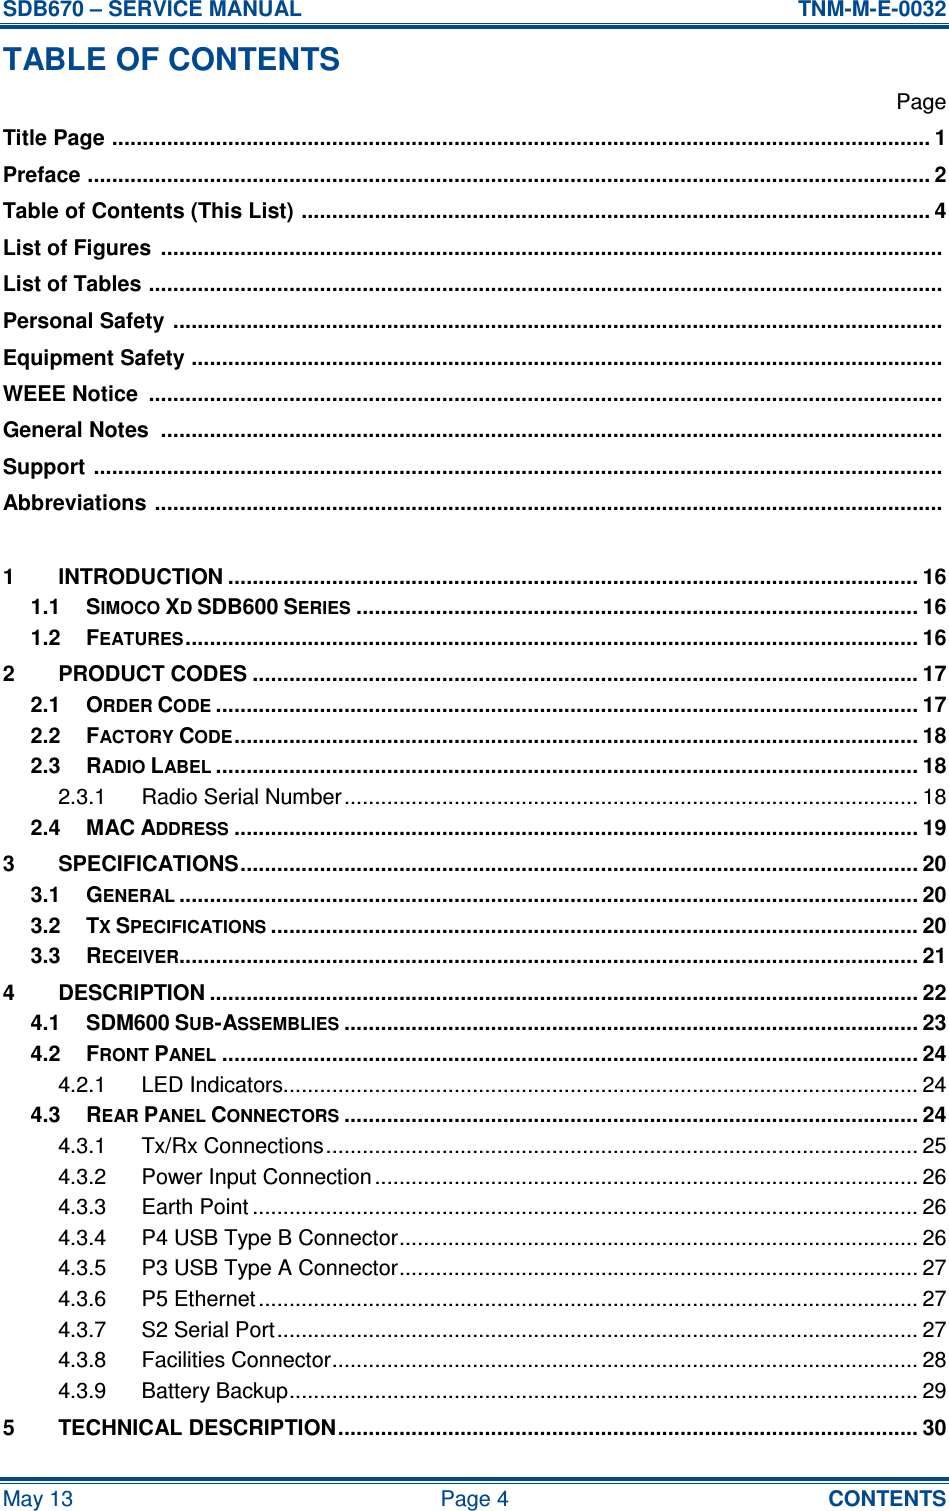 SDB670 – SERVICE MANUAL  TNM-M-E-0032 May 13  Page 4  CONTENTS TABLE OF CONTENTS   Page Title Page ...................................................................................................................................... 1 Preface .......................................................................................................................................... 2 Table of Contents (This List) ....................................................................................................... 4 List of Figures  ................................................................................................................................  List of Tables ..................................................................................................................................  Personal Safety ..............................................................................................................................  Equipment Safety ...........................................................................................................................  WEEE Notice  ..................................................................................................................................  General Notes  ................................................................................................................................  Support ...........................................................................................................................................  Abbreviations .................................................................................................................................   1 INTRODUCTION ................................................................................................................. 16 1.1 SIMOCO XD SDB600 SERIES............................................................................................ 16 1.2 FEATURES........................................................................................................................ 16 2 PRODUCT CODES ............................................................................................................. 17 2.1 ORDER CODE................................................................................................................... 17 2.2 FACTORY CODE................................................................................................................ 18 2.3 RADIO LABEL................................................................................................................... 18 2.3.1 Radio Serial Number.............................................................................................. 18 2.4 MAC ADDRESS................................................................................................................ 19 3 SPECIFICATIONS............................................................................................................... 20 3.1 GENERAL......................................................................................................................... 20 3.2 TX SPECIFICATIONS.......................................................................................................... 20 3.3 RECEIVER......................................................................................................................... 21 4 DESCRIPTION .................................................................................................................... 22 4.1 SDM600 SUB-ASSEMBLIES.............................................................................................. 23 4.2 FRONT PANEL.................................................................................................................. 24 4.2.1 LED Indicators........................................................................................................ 24 4.3 REAR PANEL CONNECTORS.............................................................................................. 24 4.3.1 Tx/Rx Connections................................................................................................. 25 4.3.2 Power Input Connection ......................................................................................... 26 4.3.3 Earth Point ............................................................................................................. 26 4.3.4 P4 USB Type B Connector..................................................................................... 26 4.3.5 P3 USB Type A Connector..................................................................................... 27 4.3.6 P5 Ethernet ............................................................................................................ 27 4.3.7 S2 Serial Port......................................................................................................... 27 4.3.8 Facilities Connector................................................................................................ 28 4.3.9 Battery Backup....................................................................................................... 29 5 TECHNICAL DESCRIPTION............................................................................................... 30 